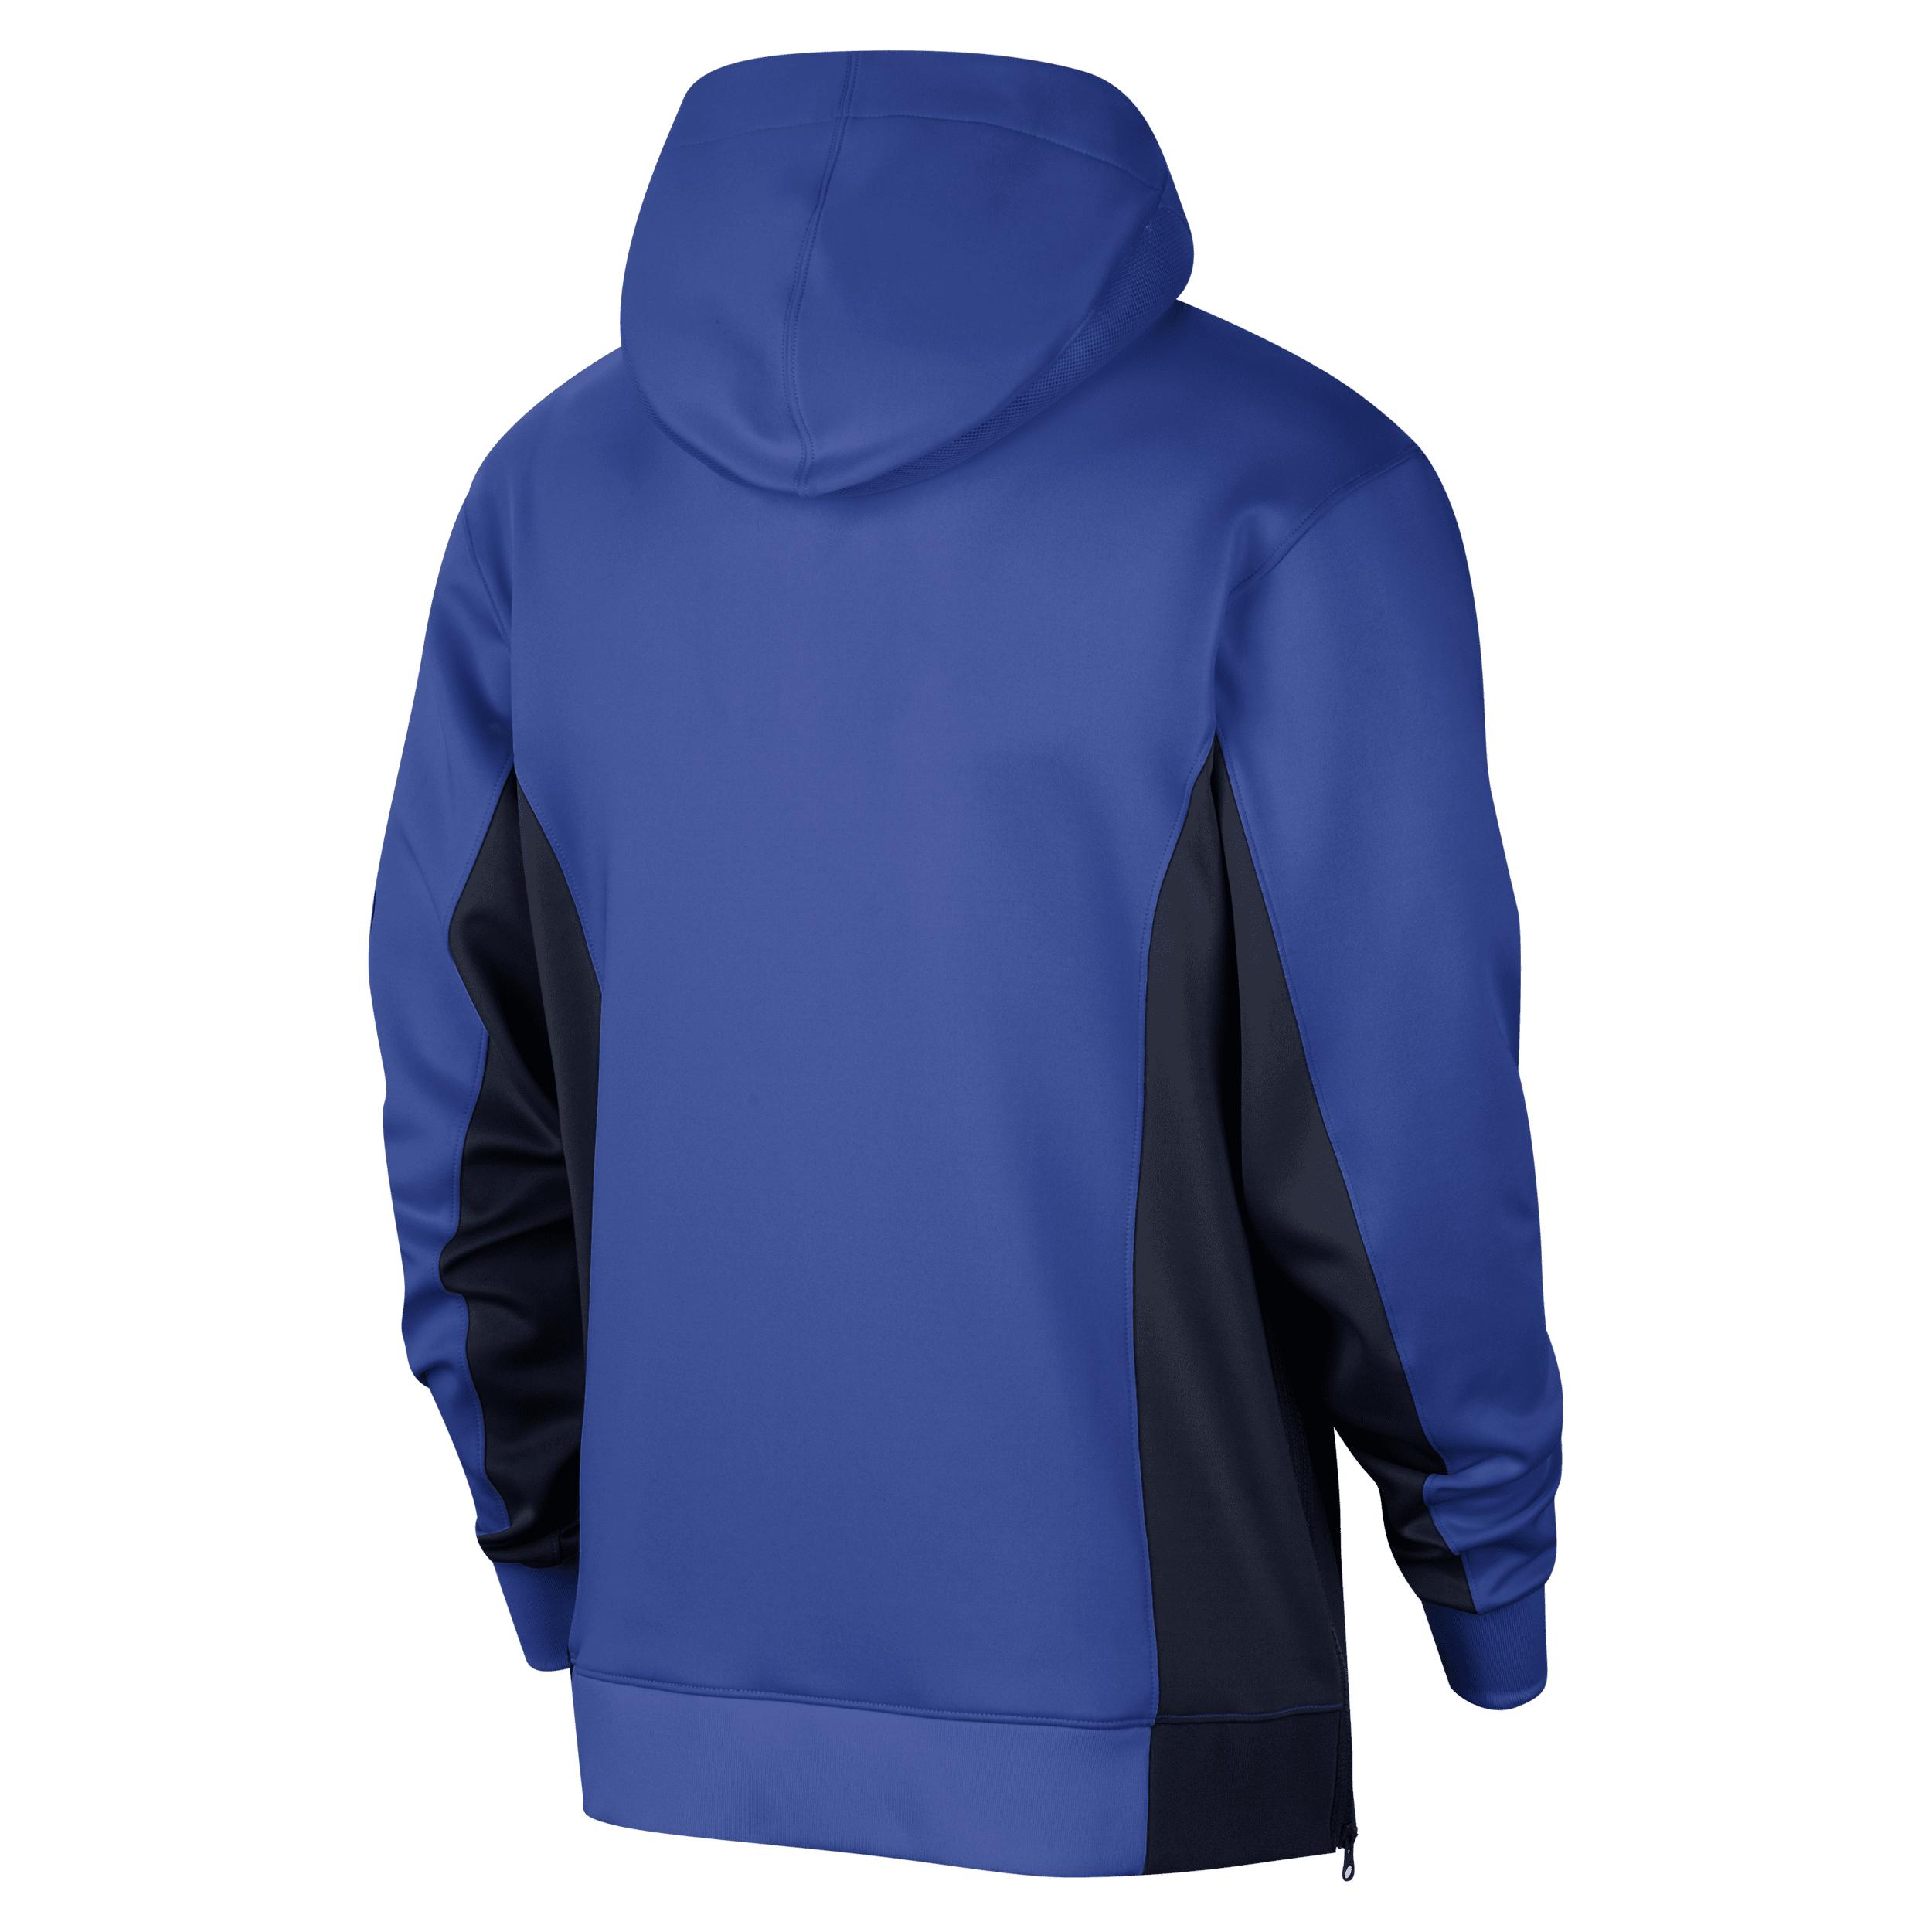 Nike Dallas Mavericks Showtime Dri-fit Nba Full-zip Hoodie 50% Recycled  Polyester in Blue for Men